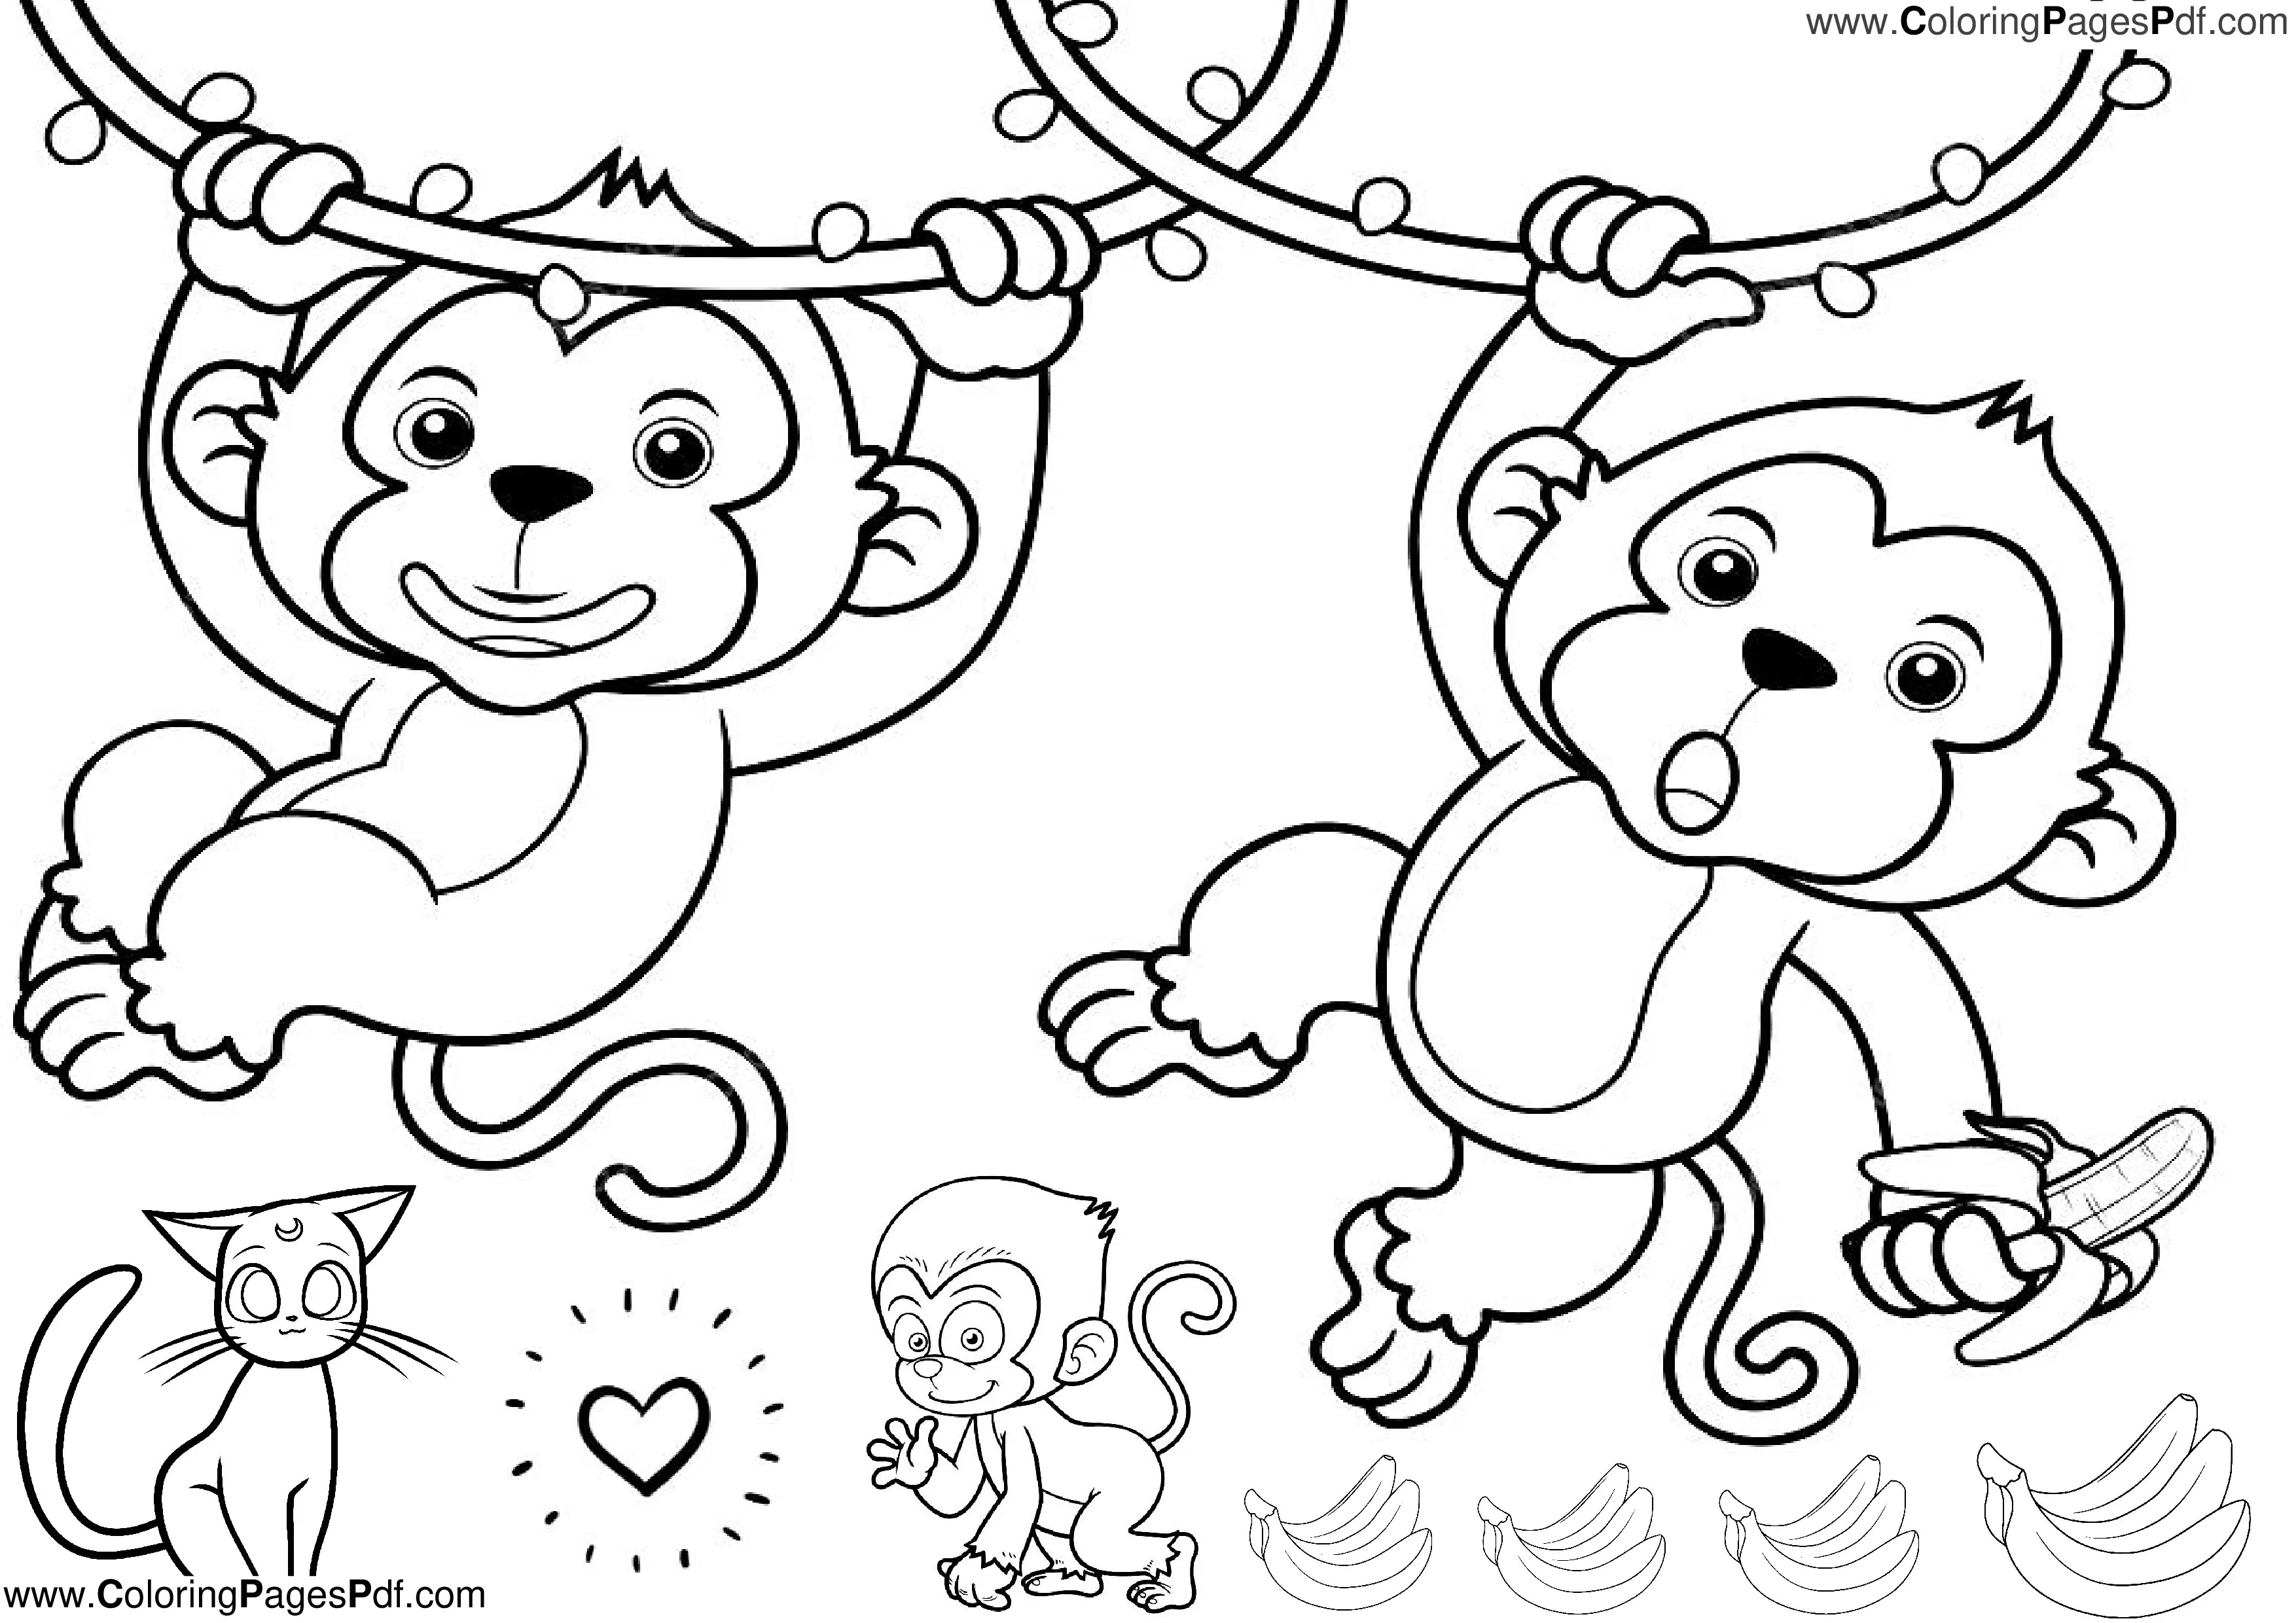 Monkey coloring pages for toddlers